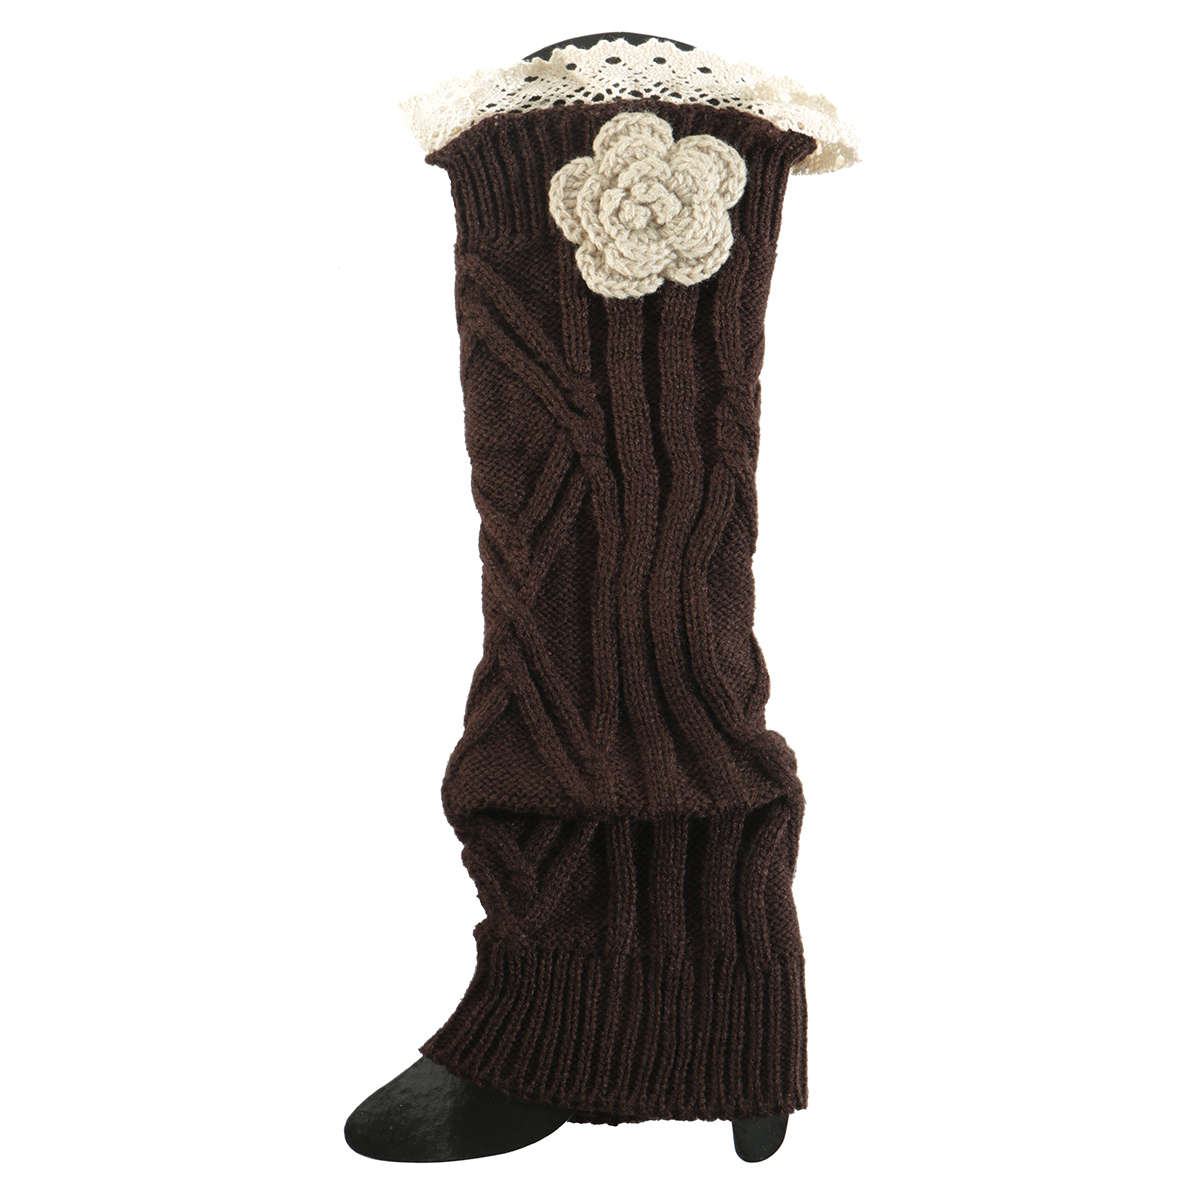 Brown Crochet Flower Boot Cuff 50sp - Click Image to Close